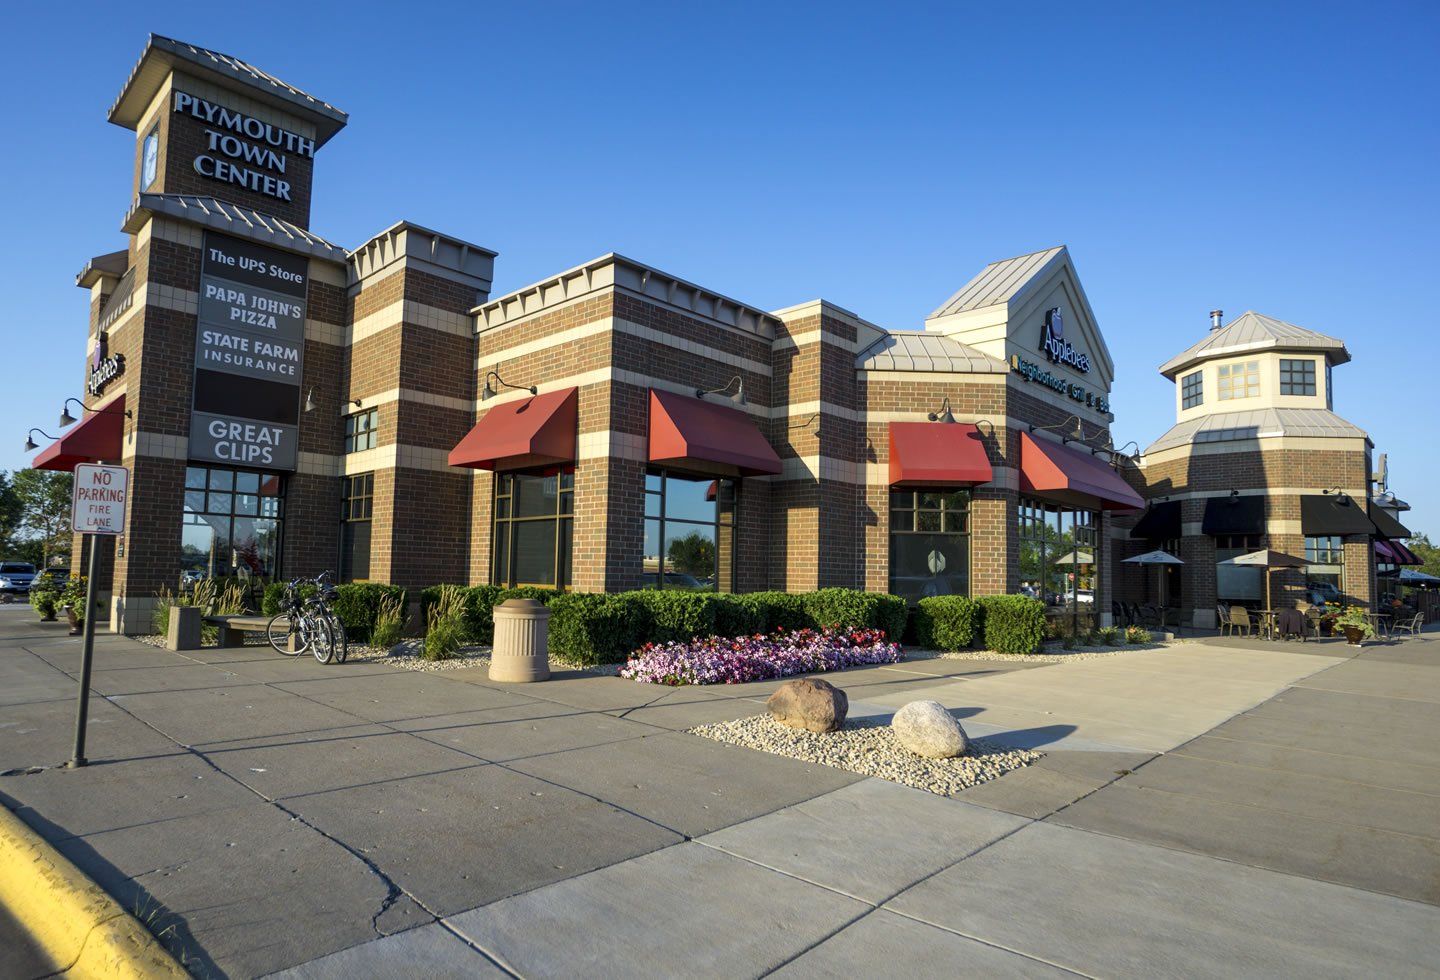 Plymouth Town Center Commercial Building — Minneapolis, Mn — West Development